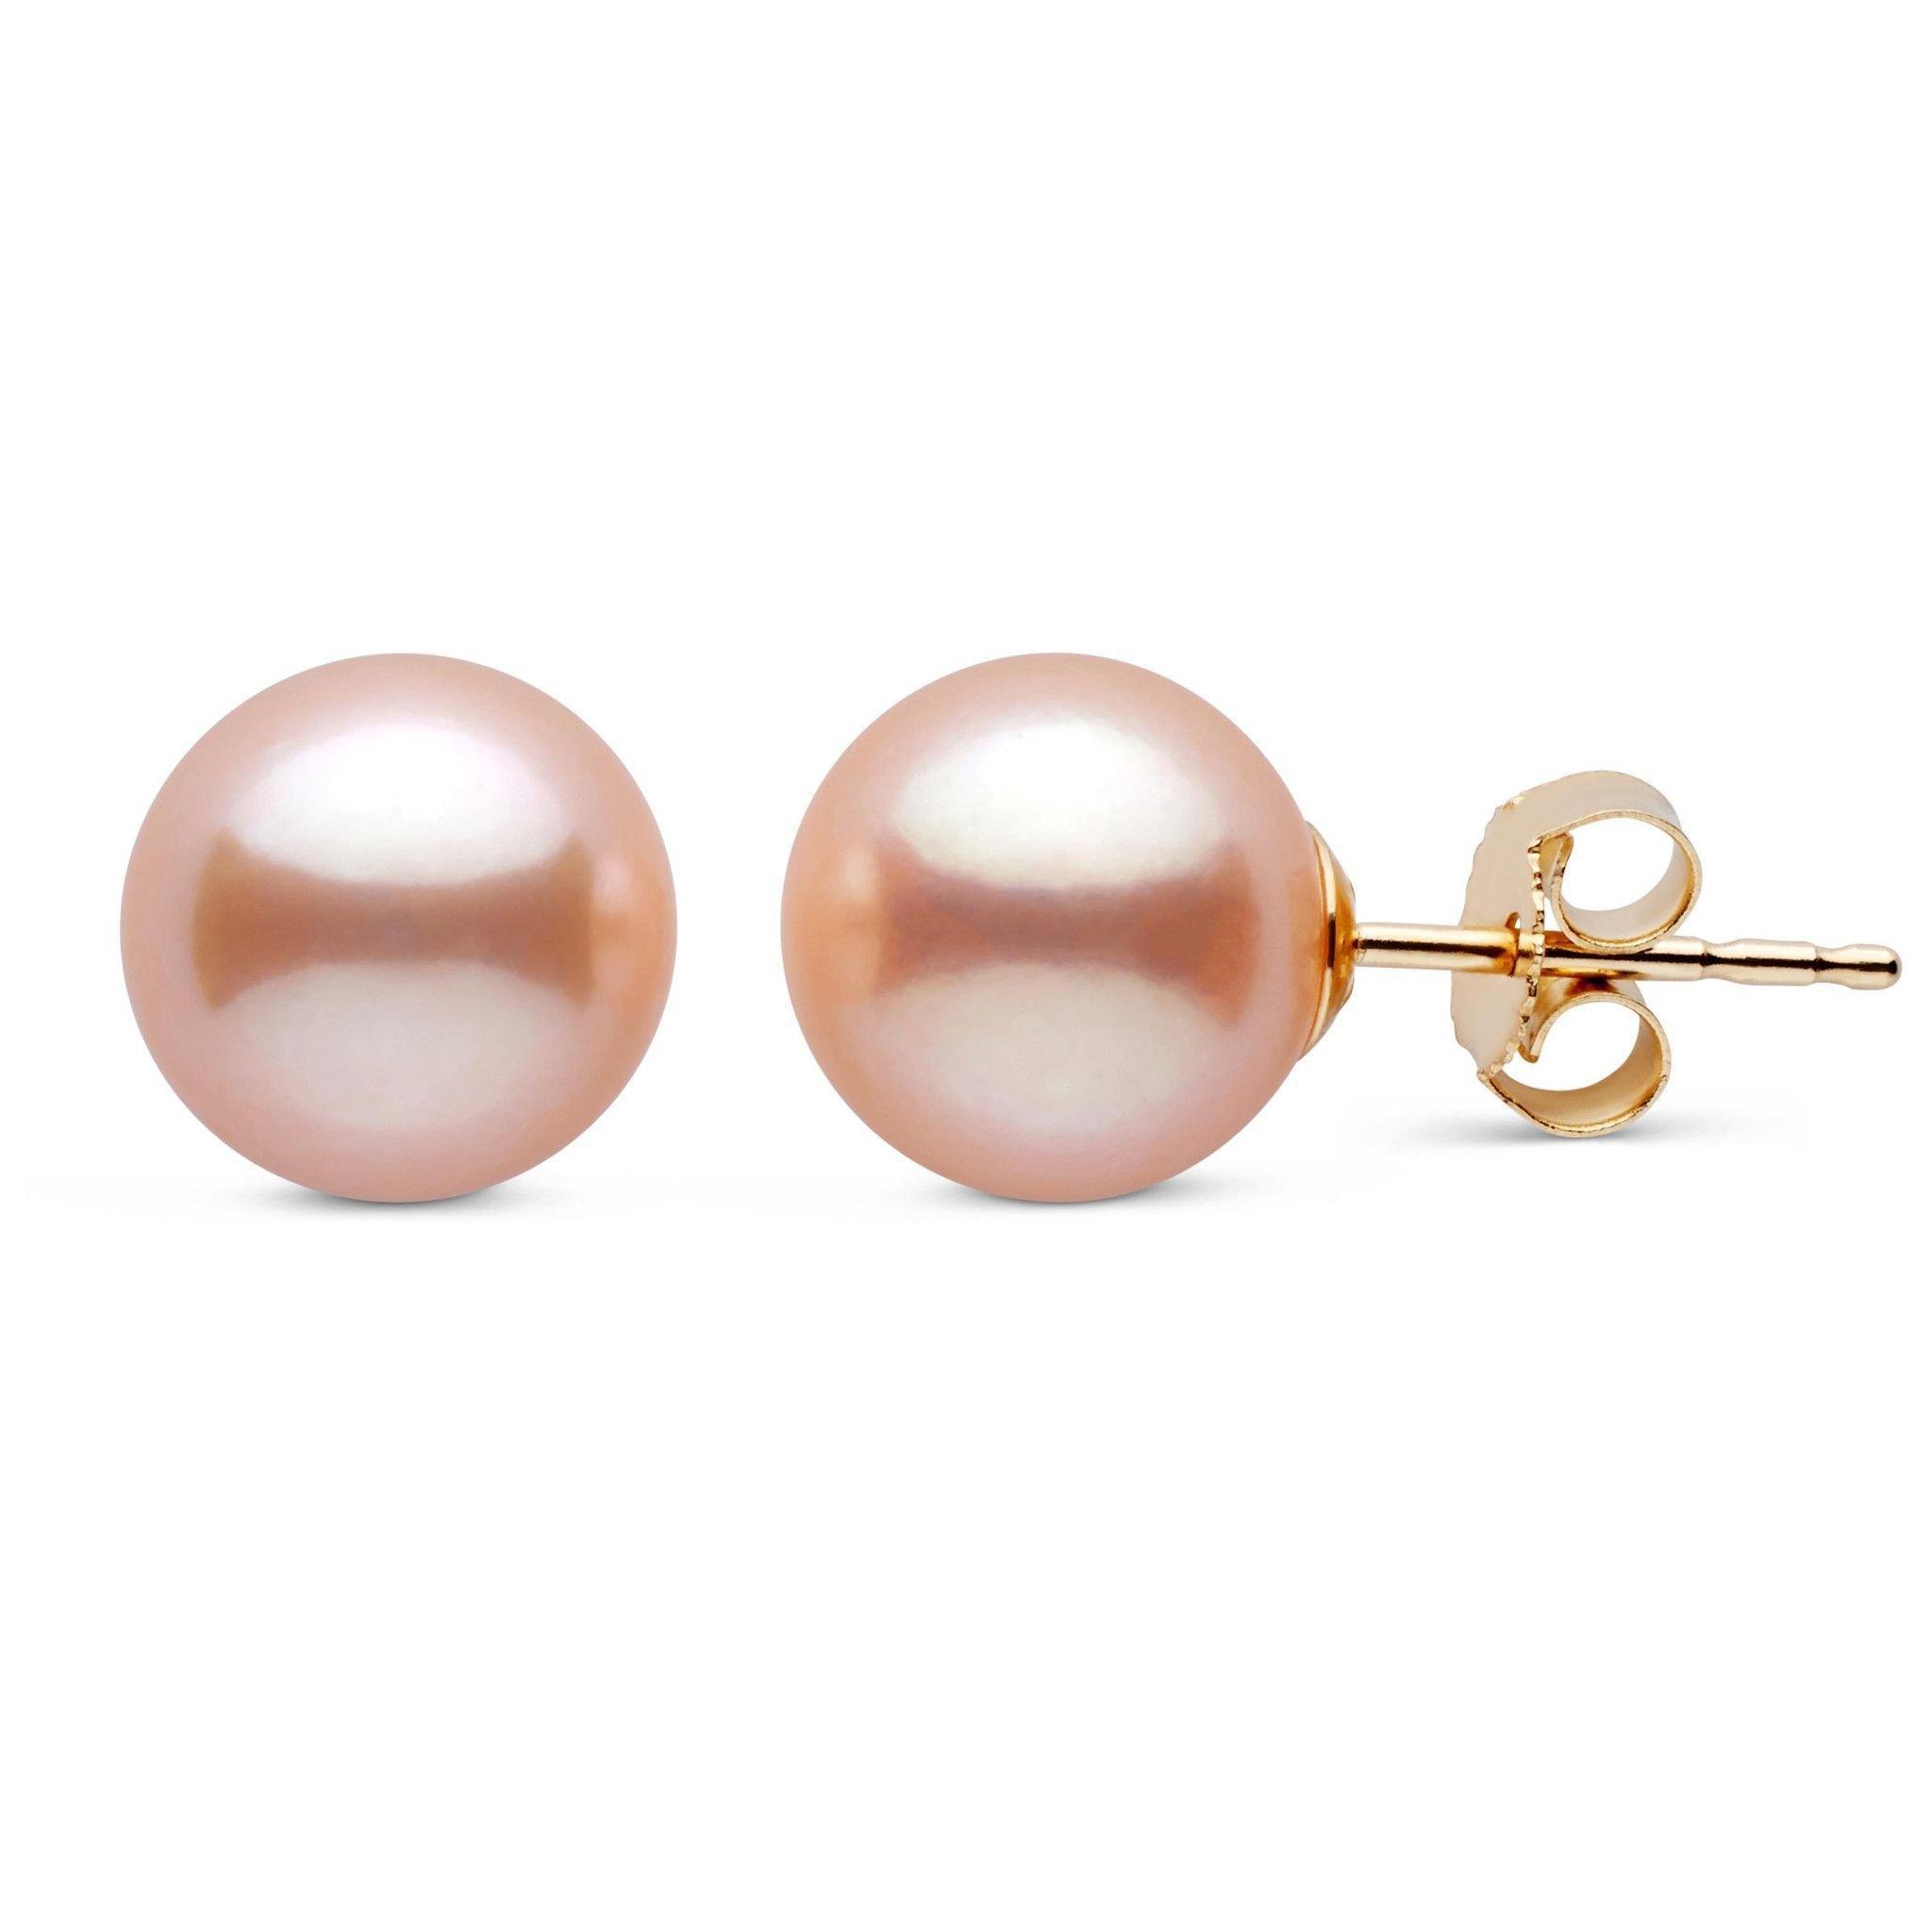 Swan Shaped Pretty Pearl Studs in White Pearls and Rose Gold Metal